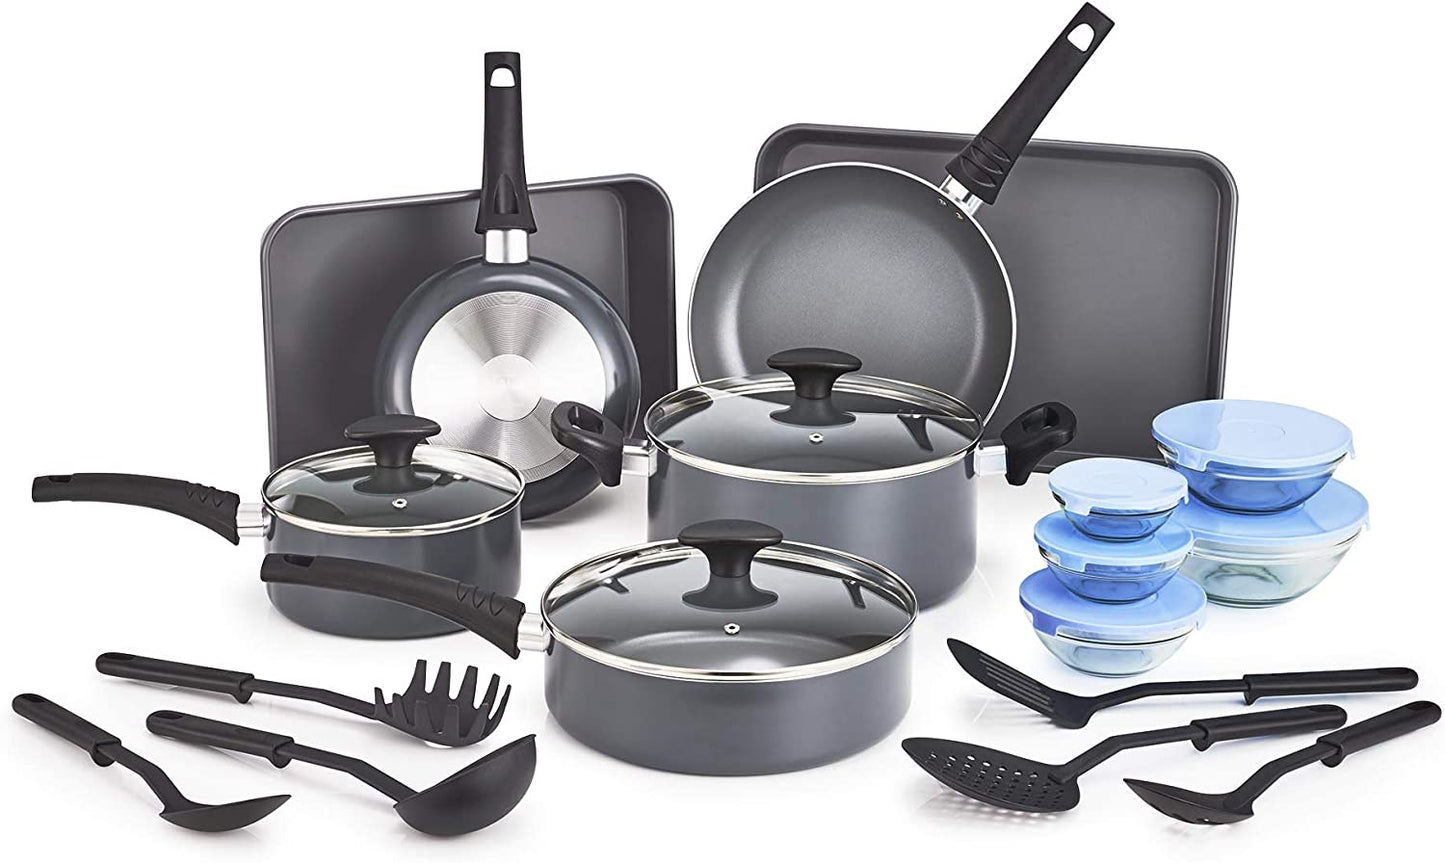 21-Piece Black Nonstick Cookware Set with Glass Lids - Includes Aluminum Bakeware, Pots and Pans, Storage Bowls & Utensils - Compatible with All Stovetops